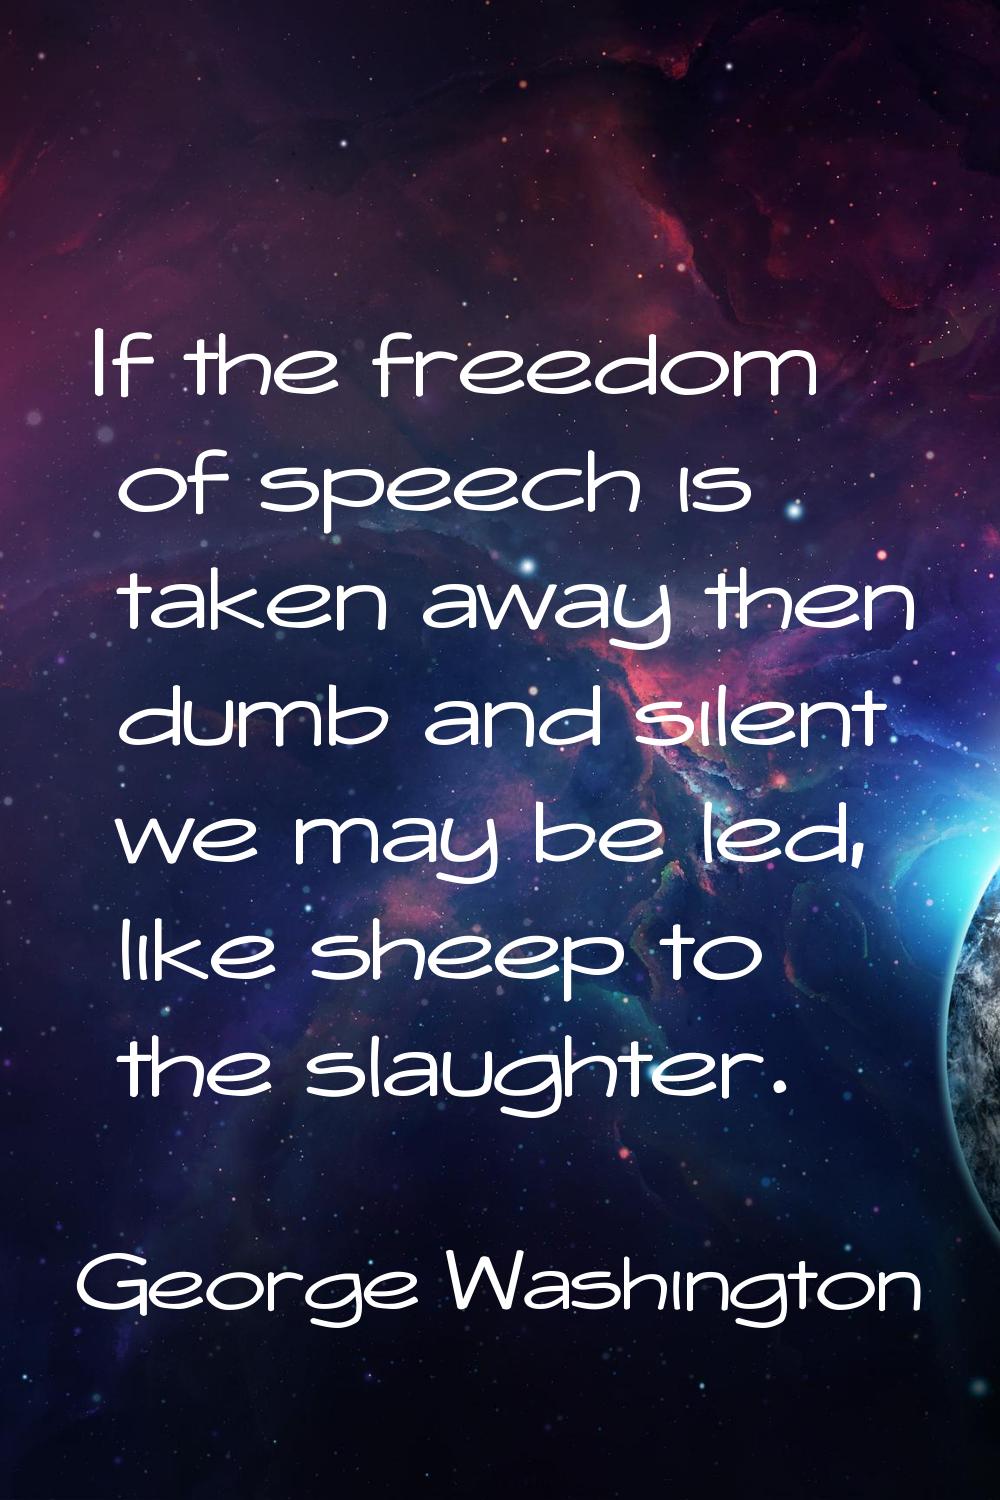 If the freedom of speech is taken away then dumb and silent we may be led, like sheep to the slaugh